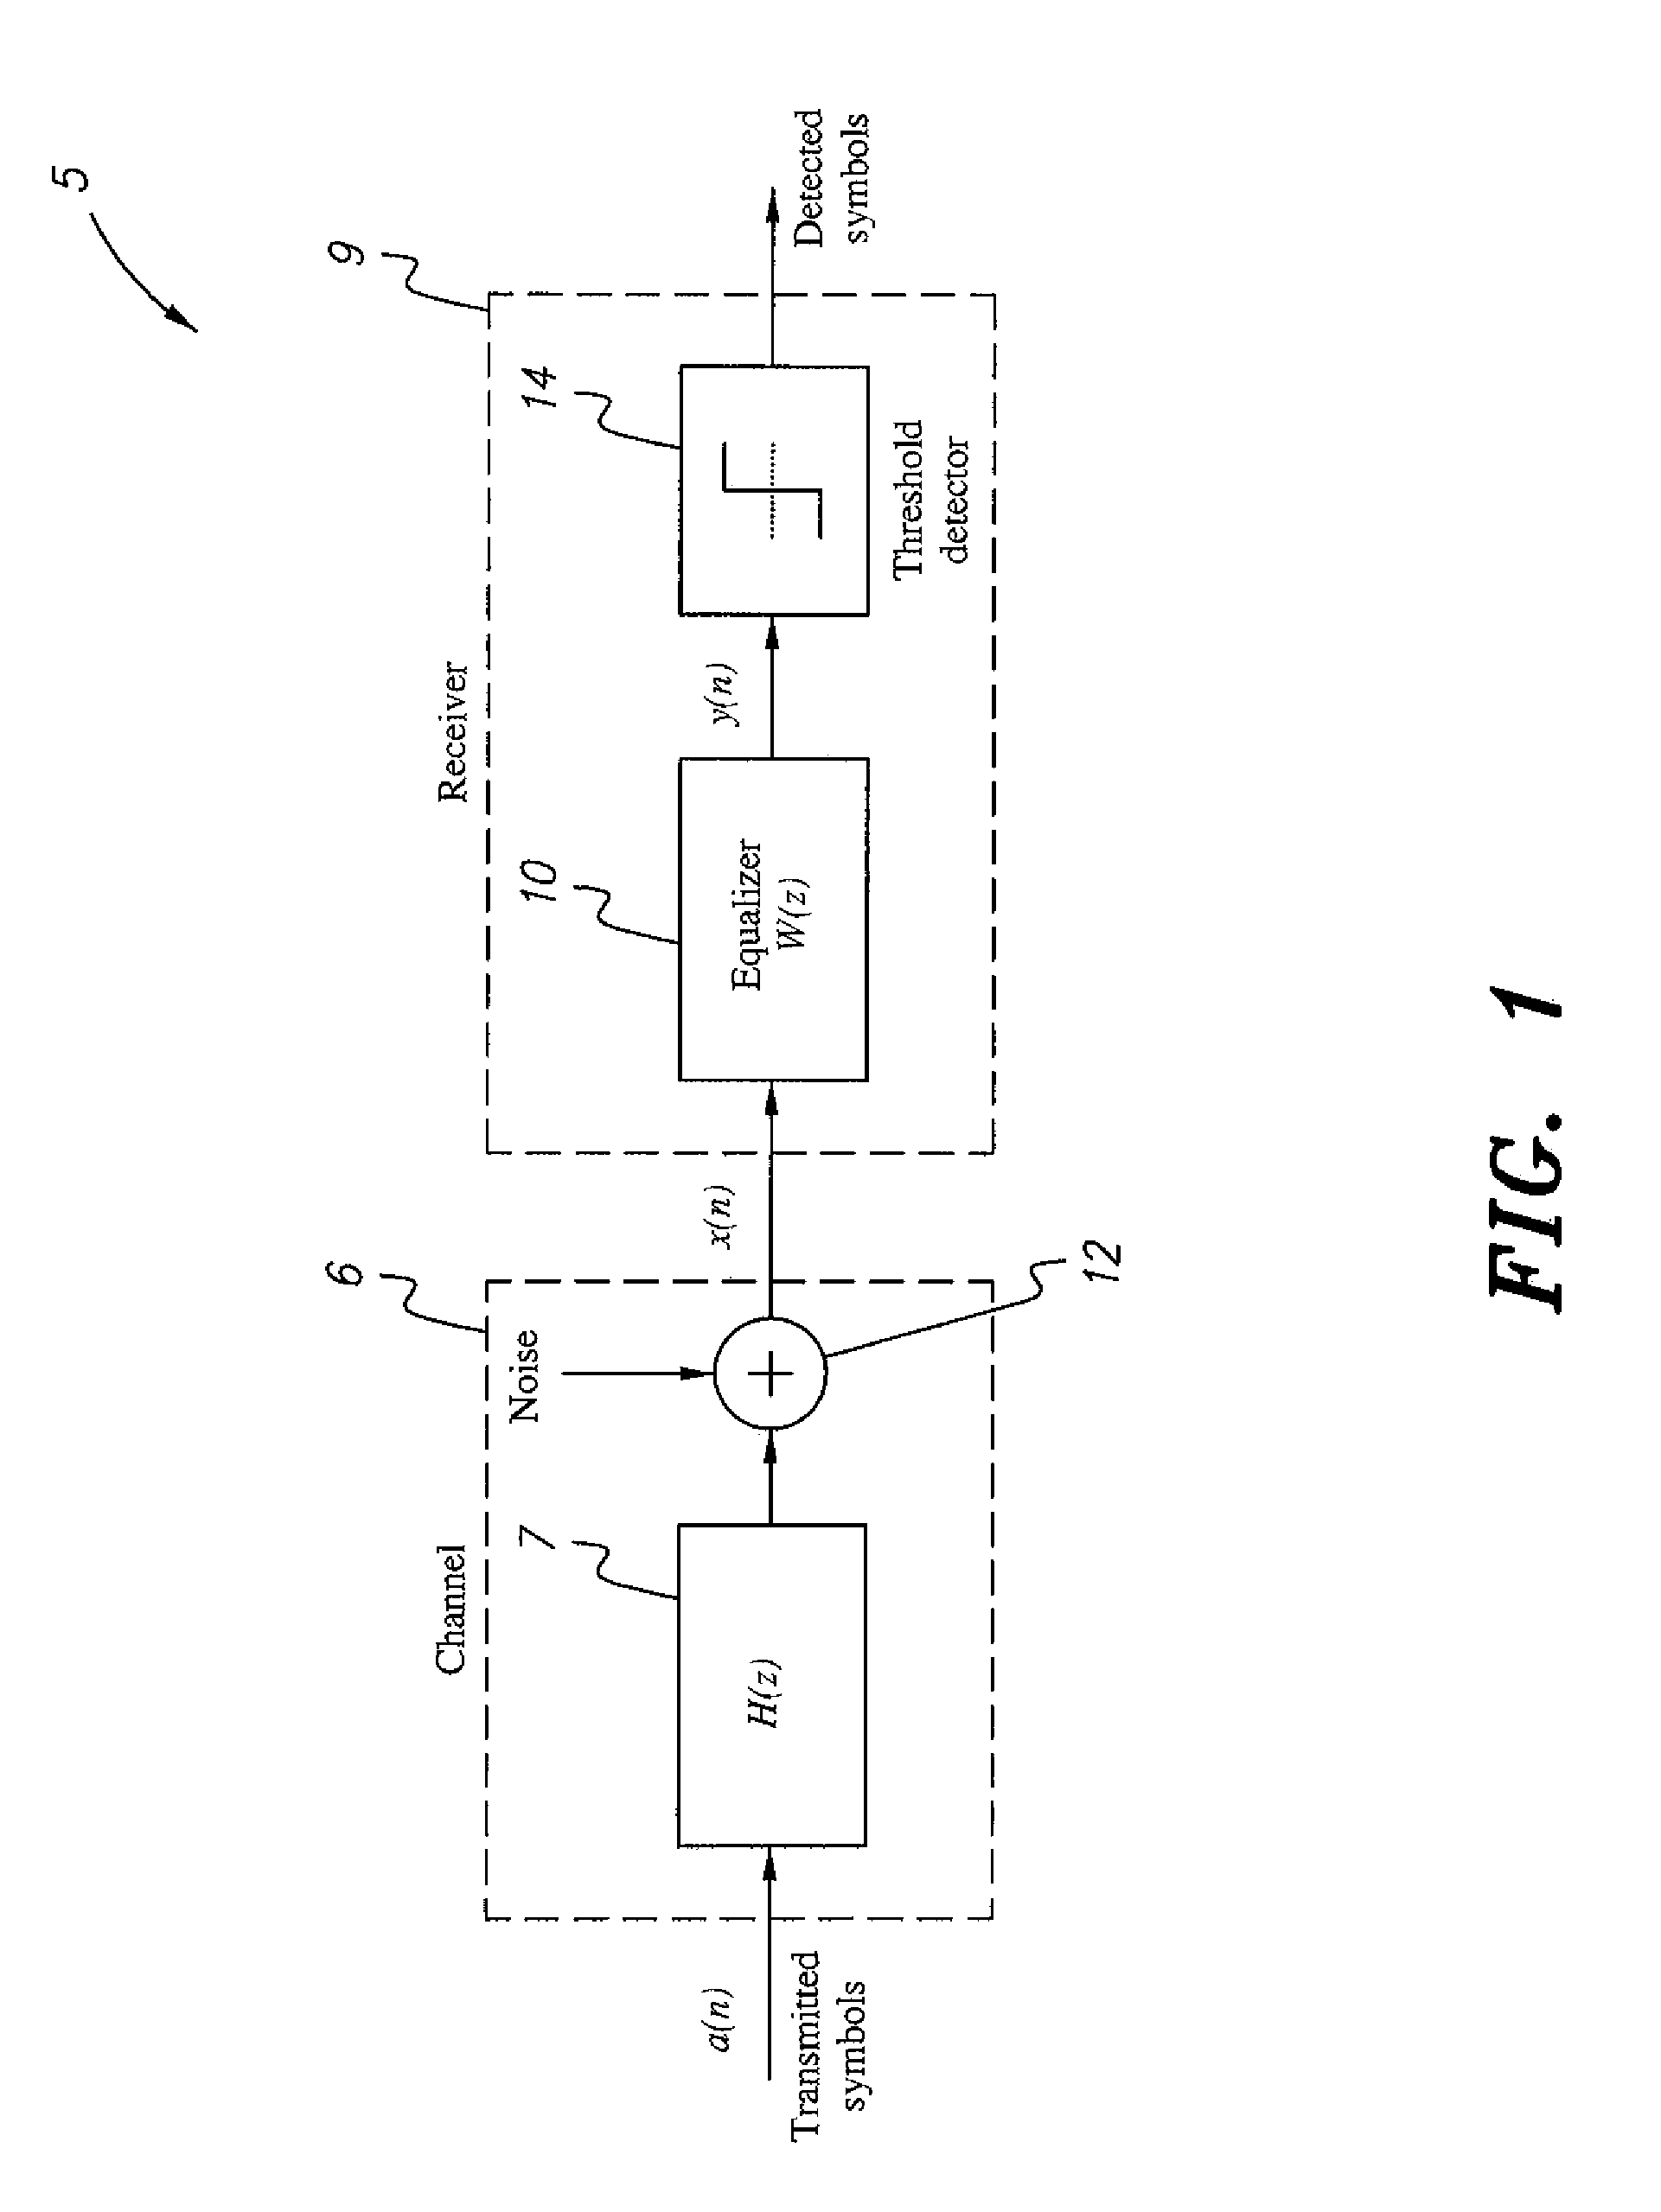 Time-varying least-mean-fourth-based channel equalization method and system